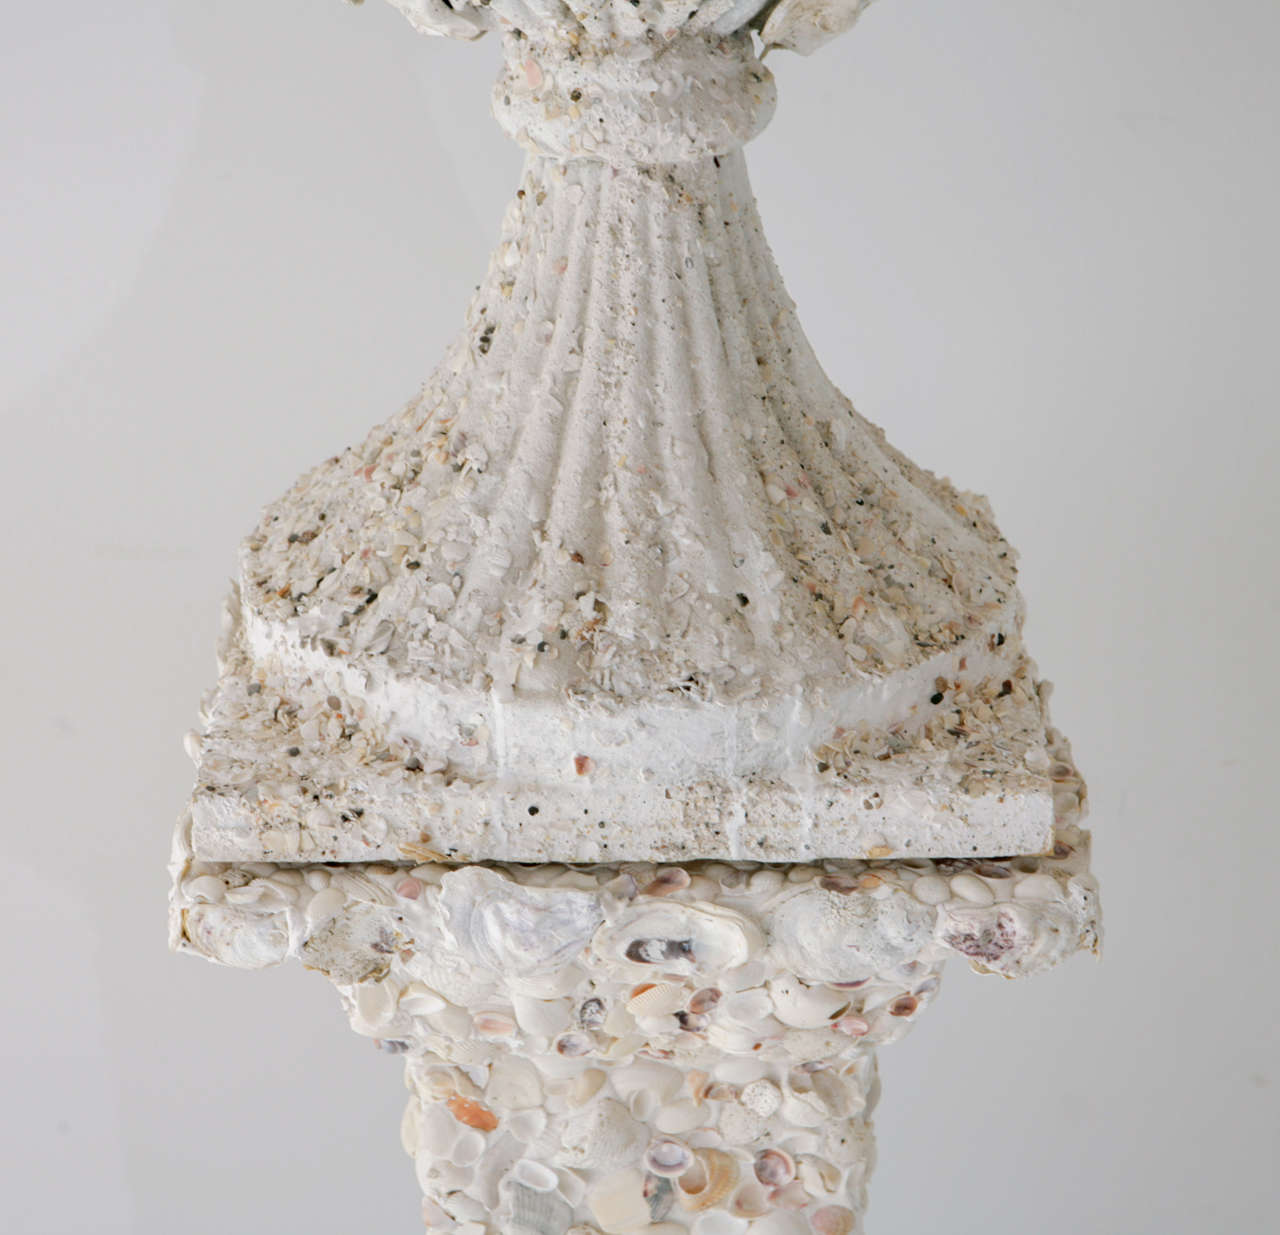 20th Century Grotto Style Shell Encrusted Urns on Pedestals